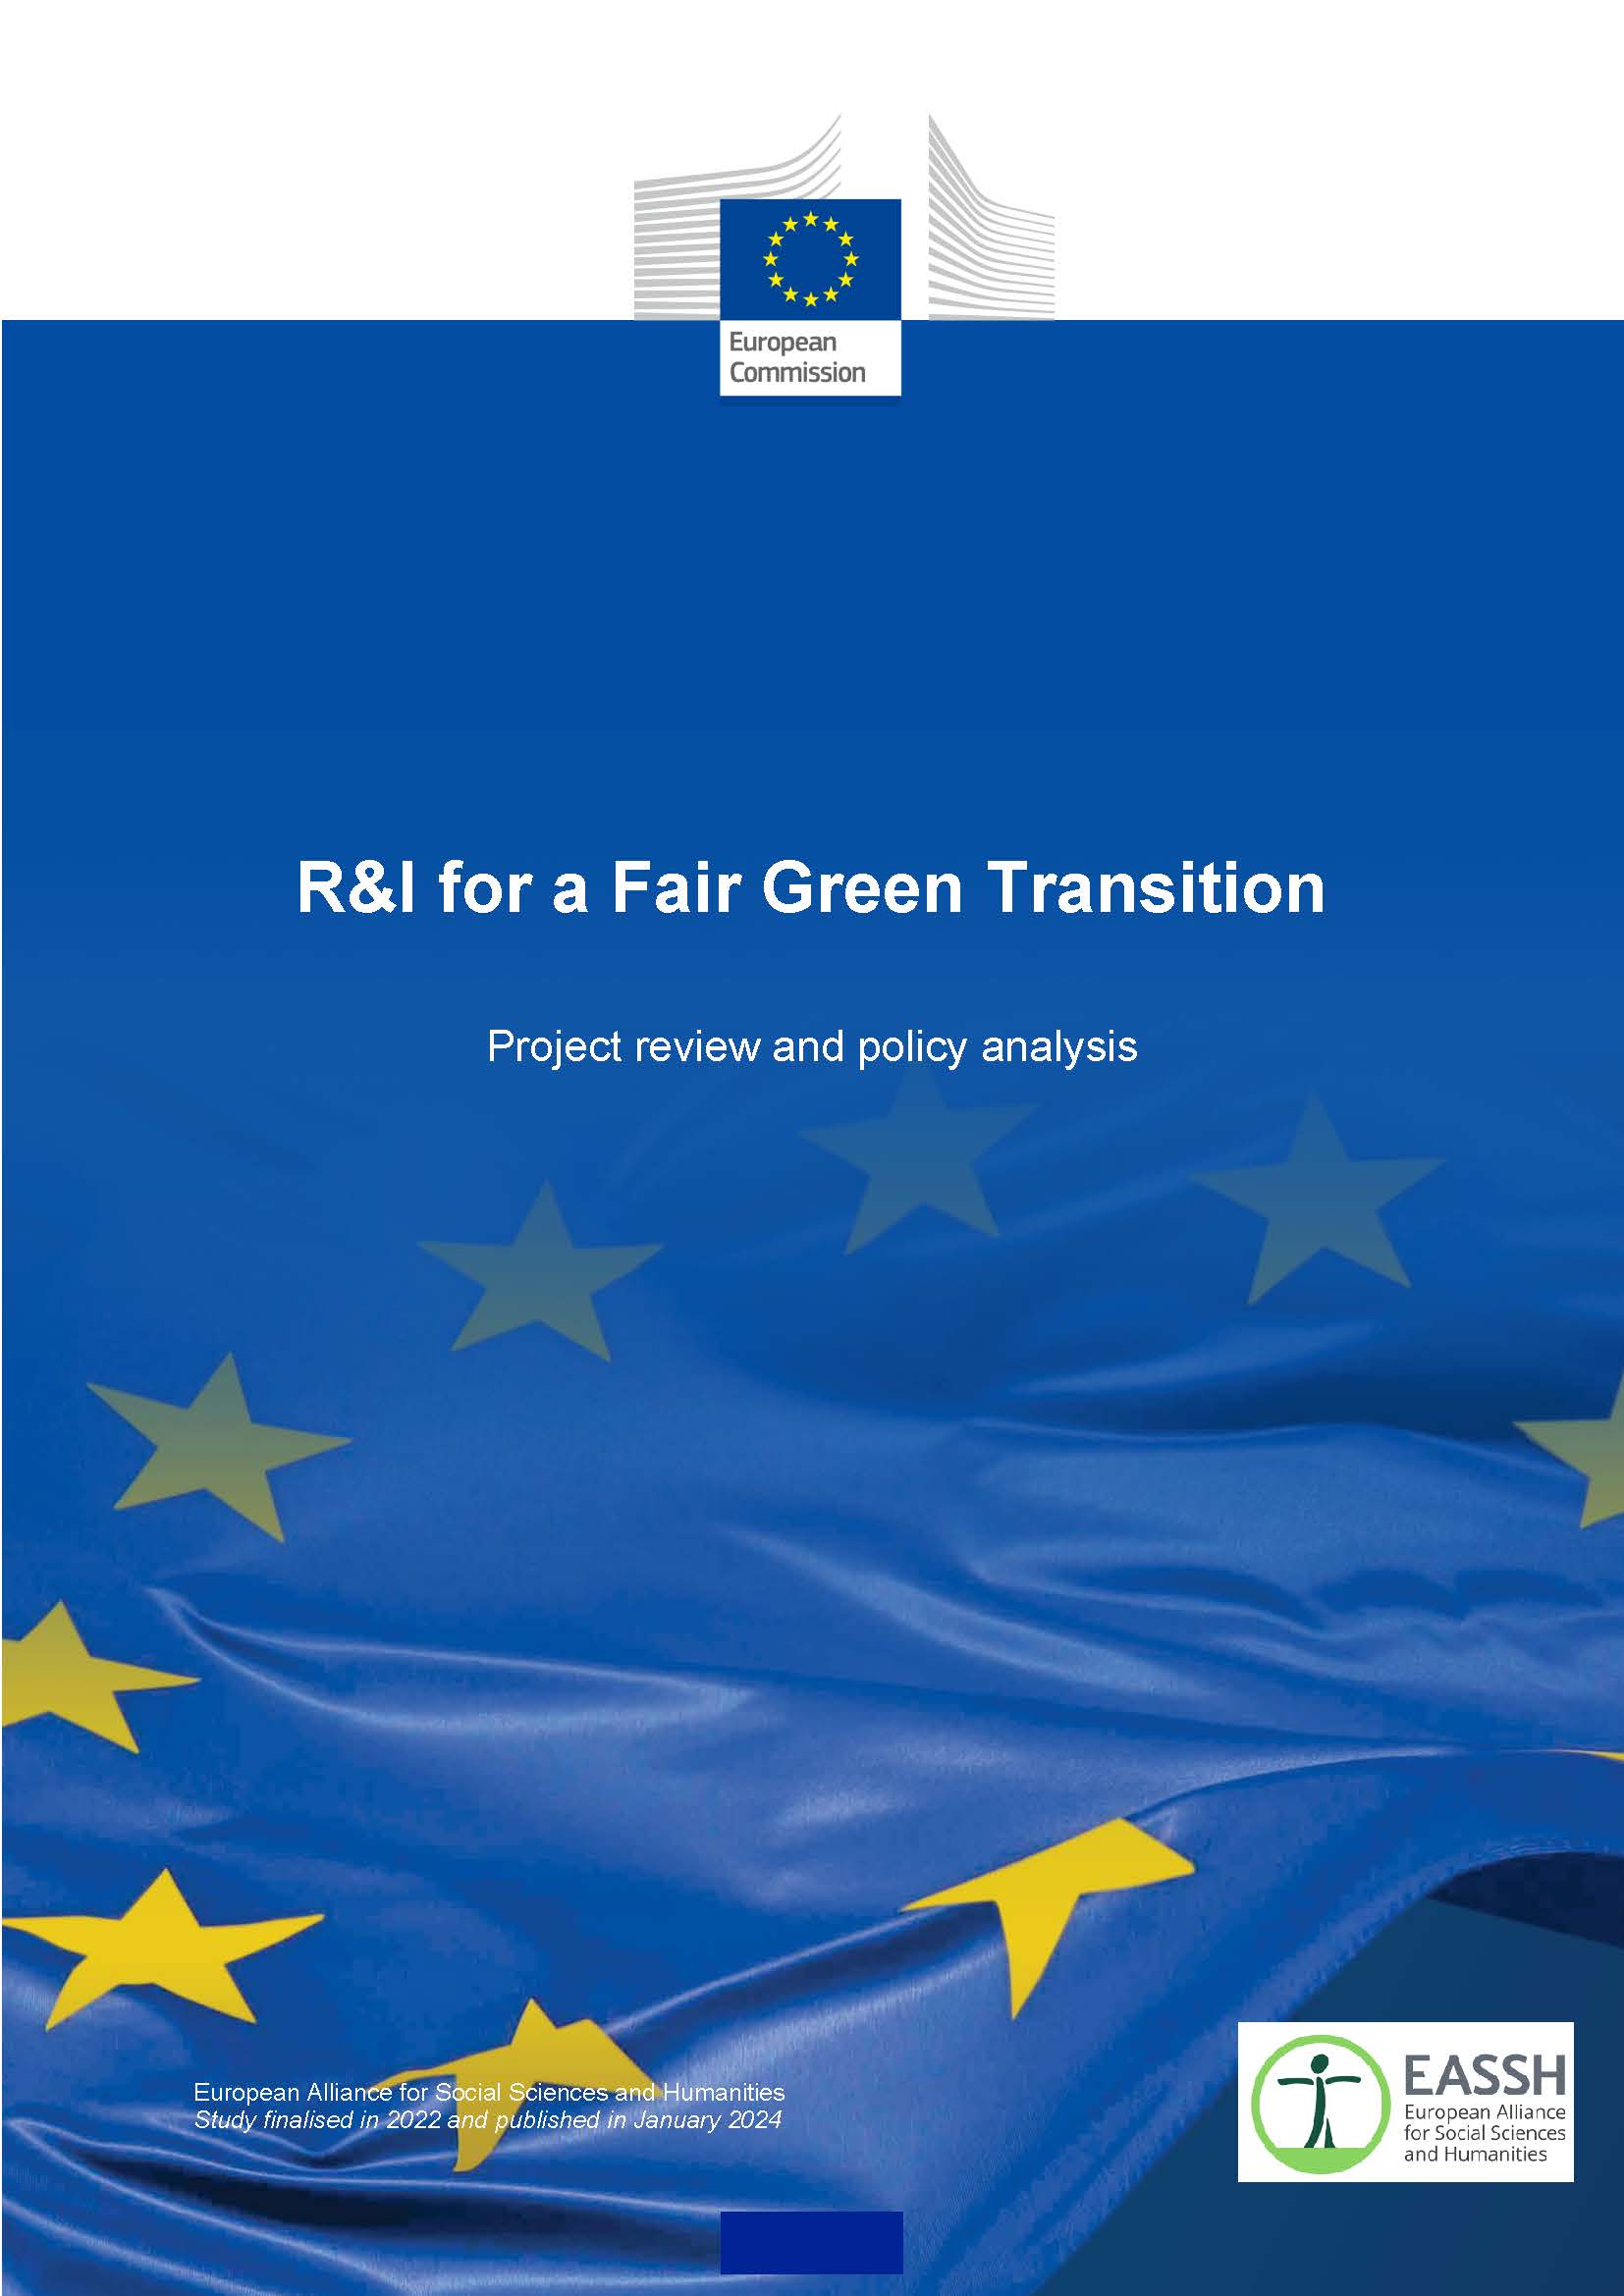 R&I for a Fair Green Transition: Project review and policy analysis
